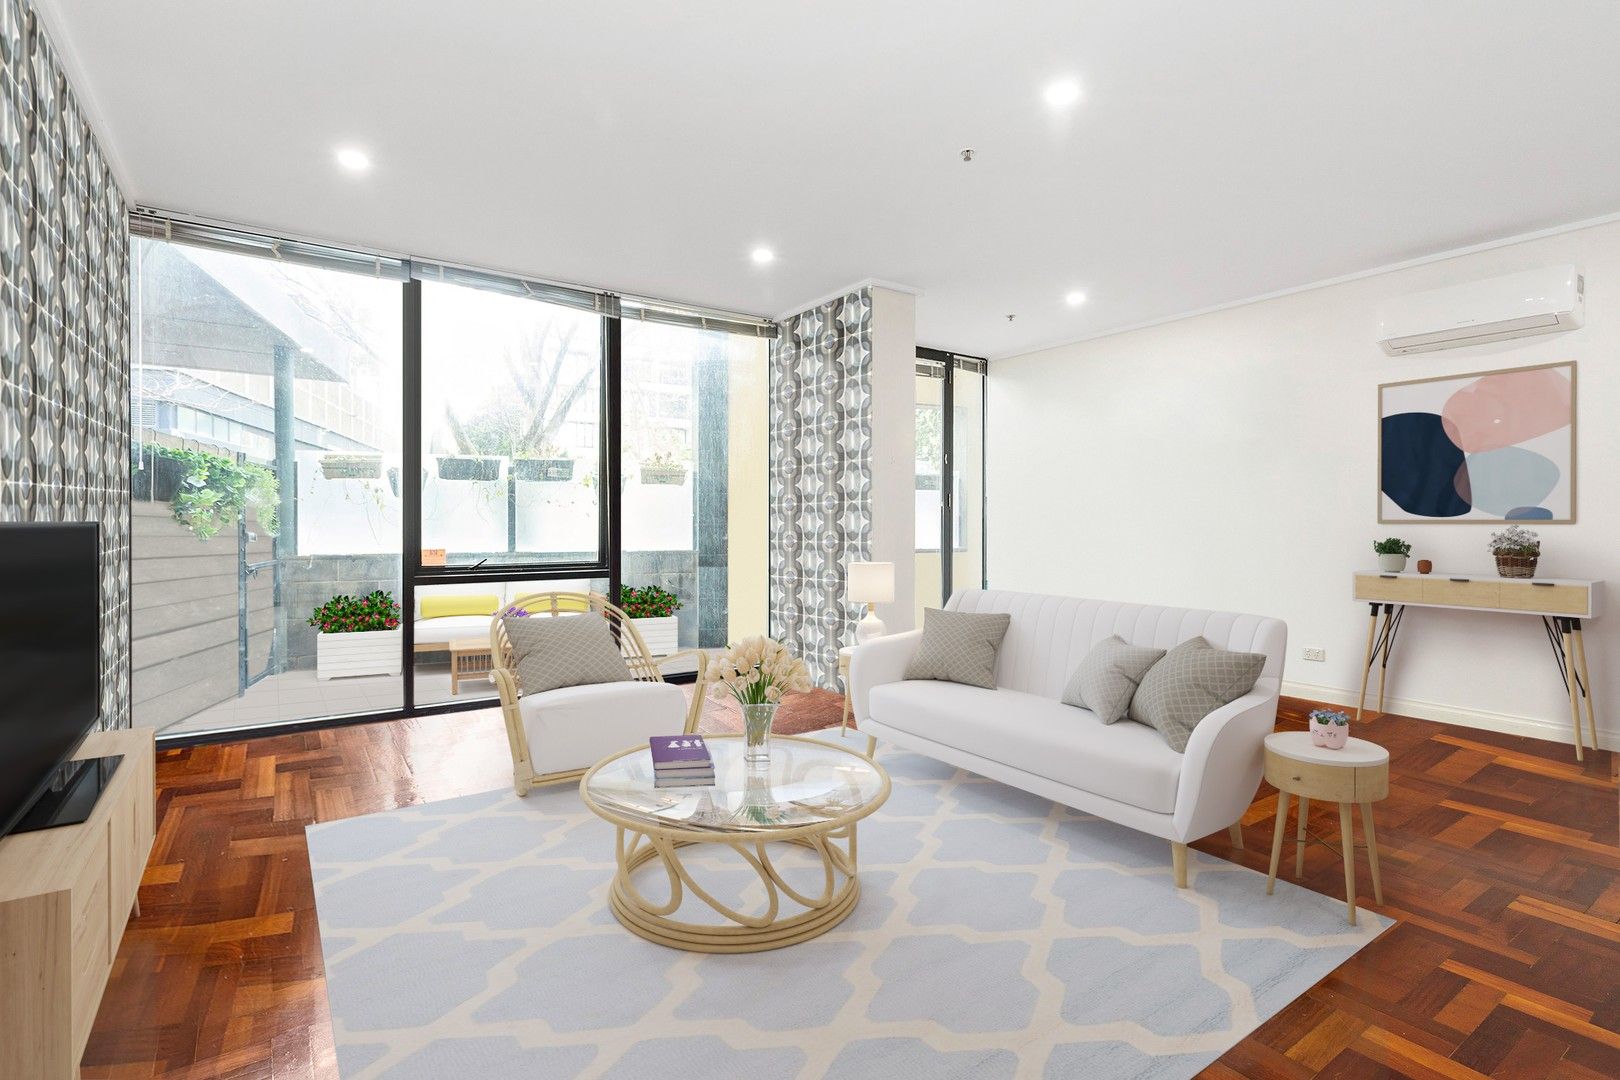 2 bedrooms Apartment / Unit / Flat in 150E Wells Street SOUTH MELBOURNE VIC, 3205